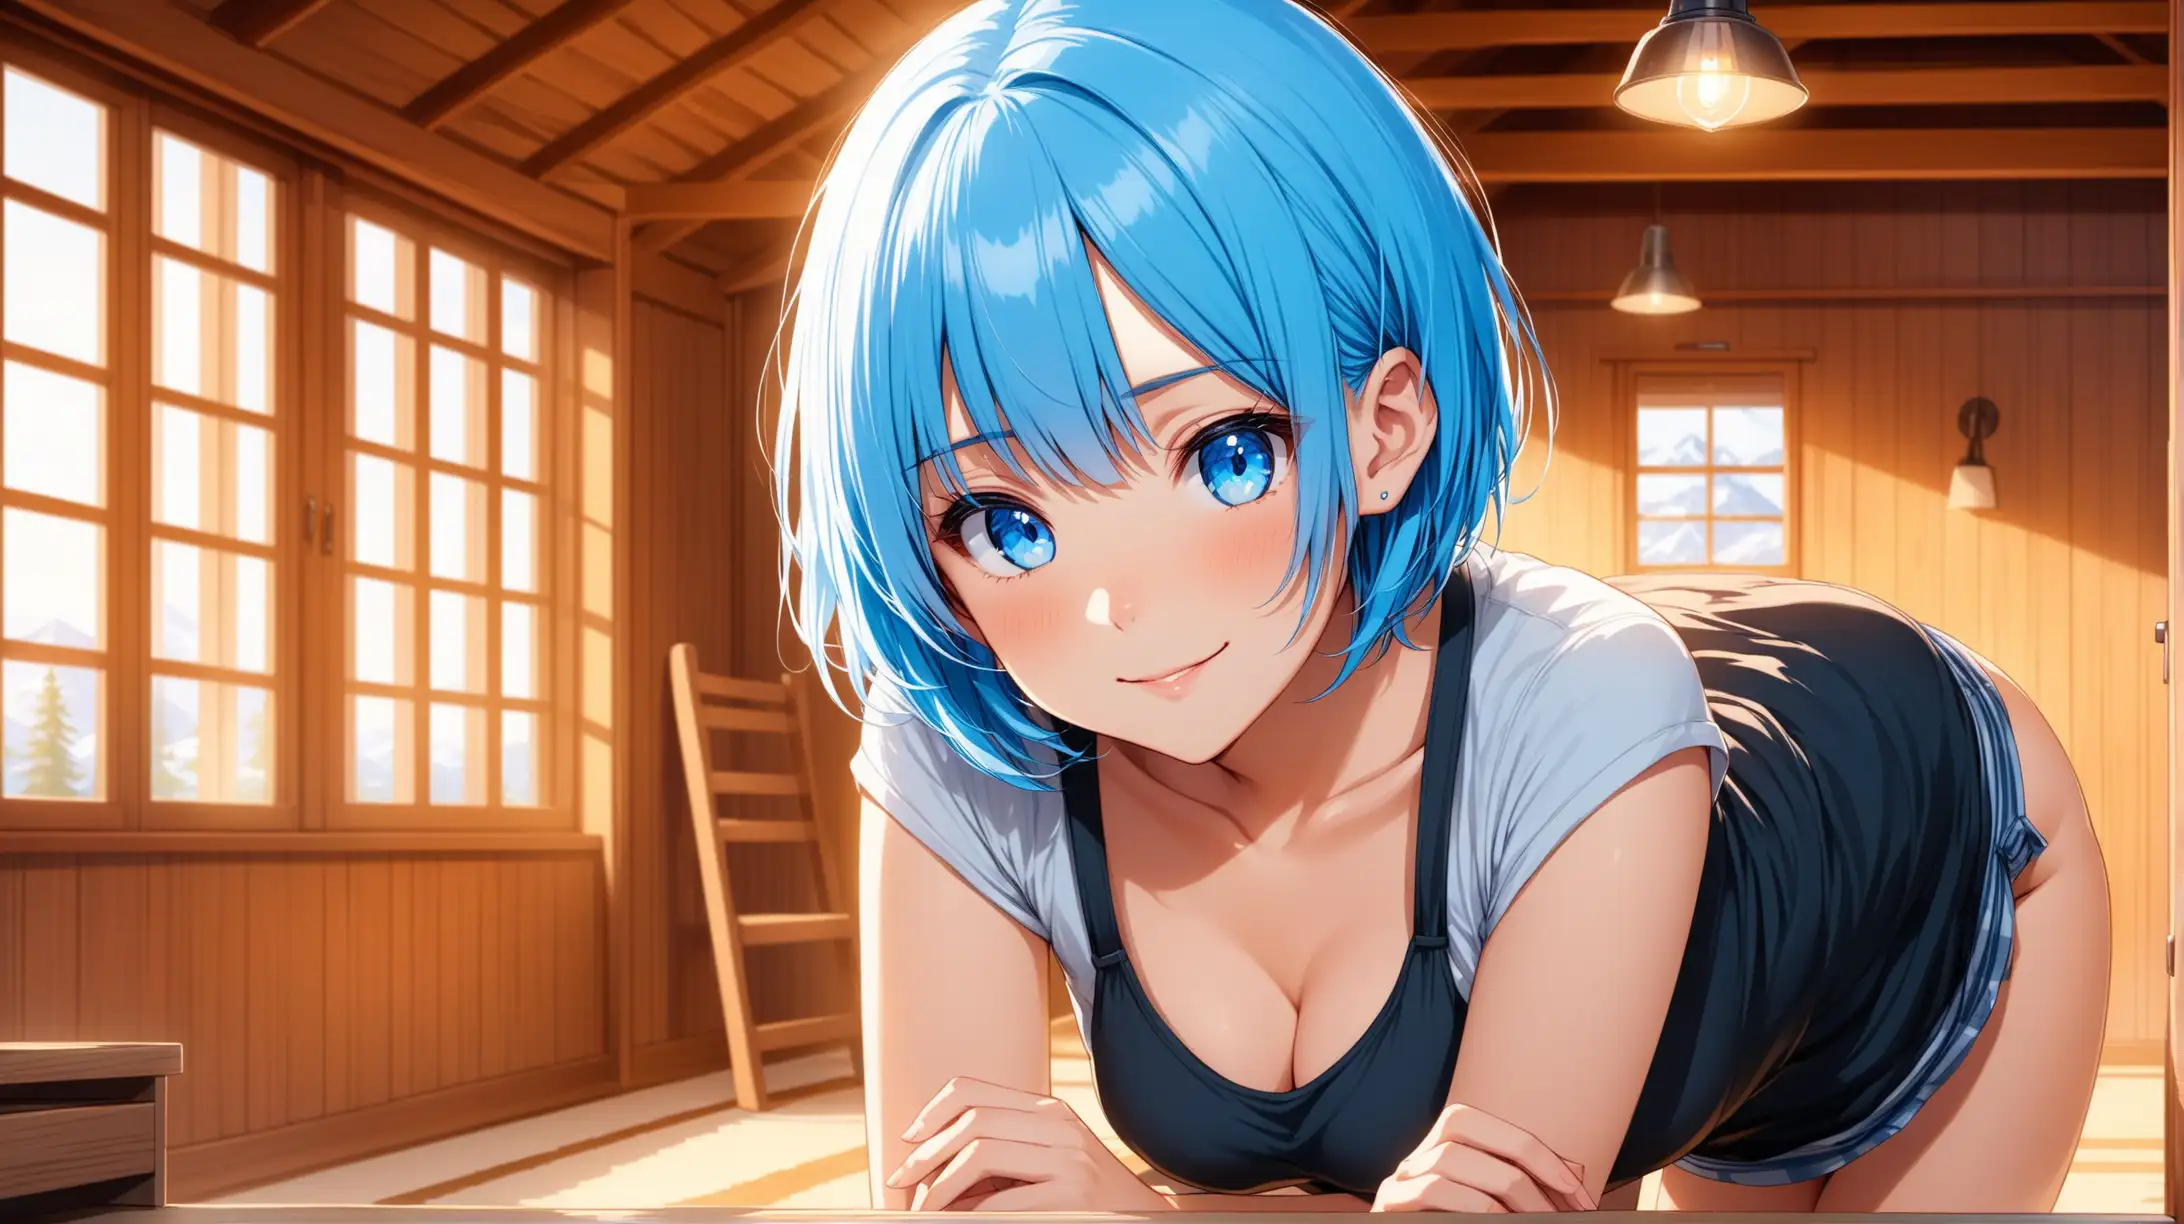 Draw the character Rem, blue eyes, high quality, indoors, cabin, soft lighting, long shot, in a seductive pose, leaning forward, wearing a casual outfit, looking at the viewer with a loving smile